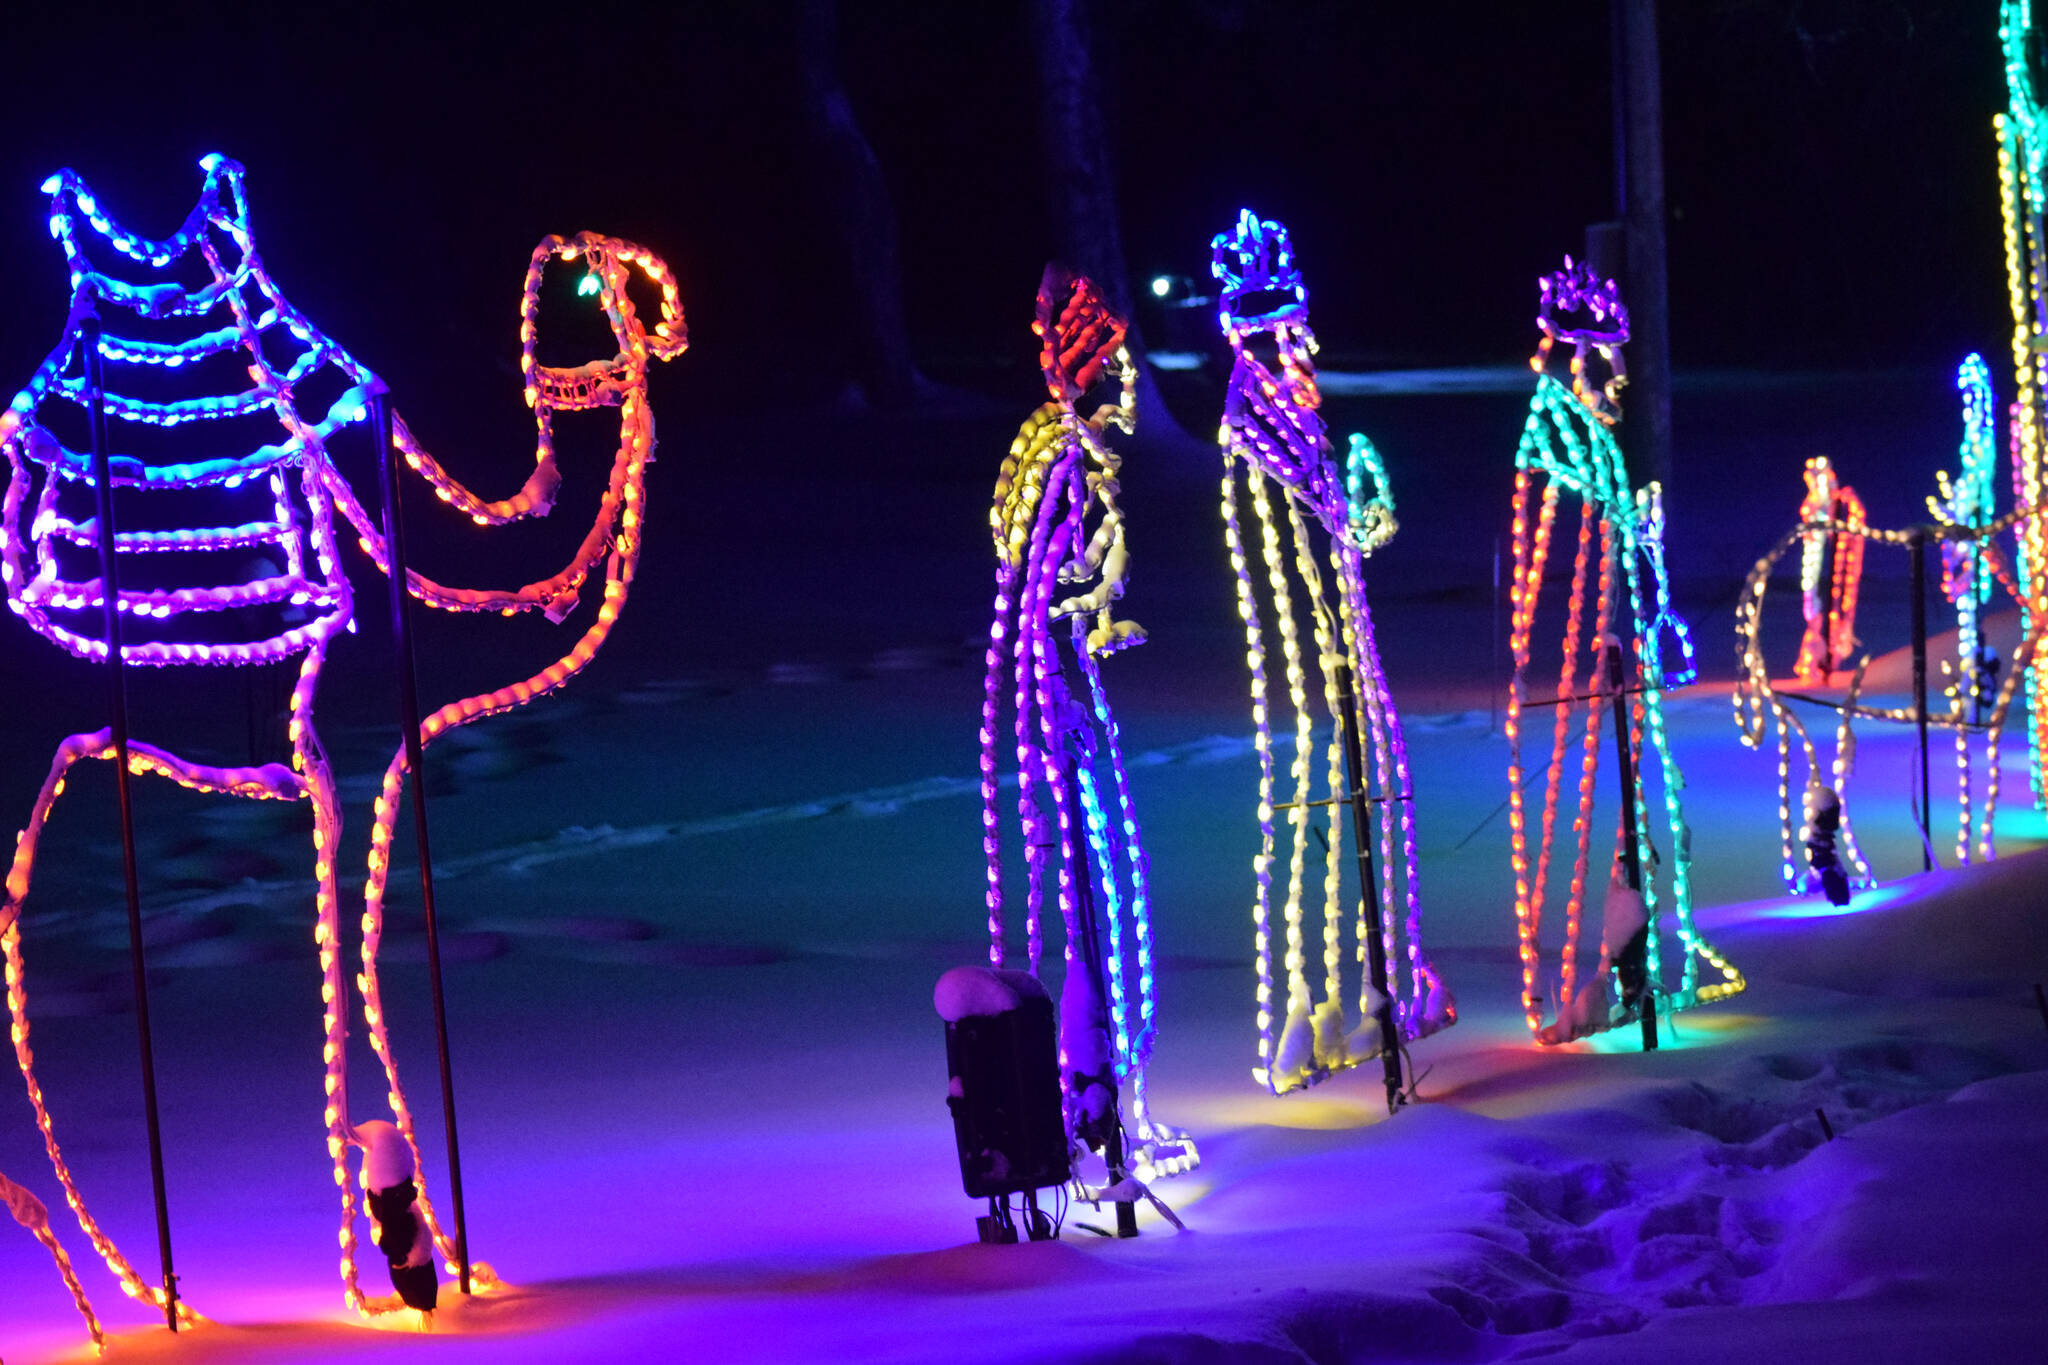 Lighted figures are displayed in the yard of Robin and Jim Allemann as part of the couple’s annual Christmas show, in Nikiski on Sunday, Dec. 19, 2021. (Camille Botello/Peninsula Clarion)